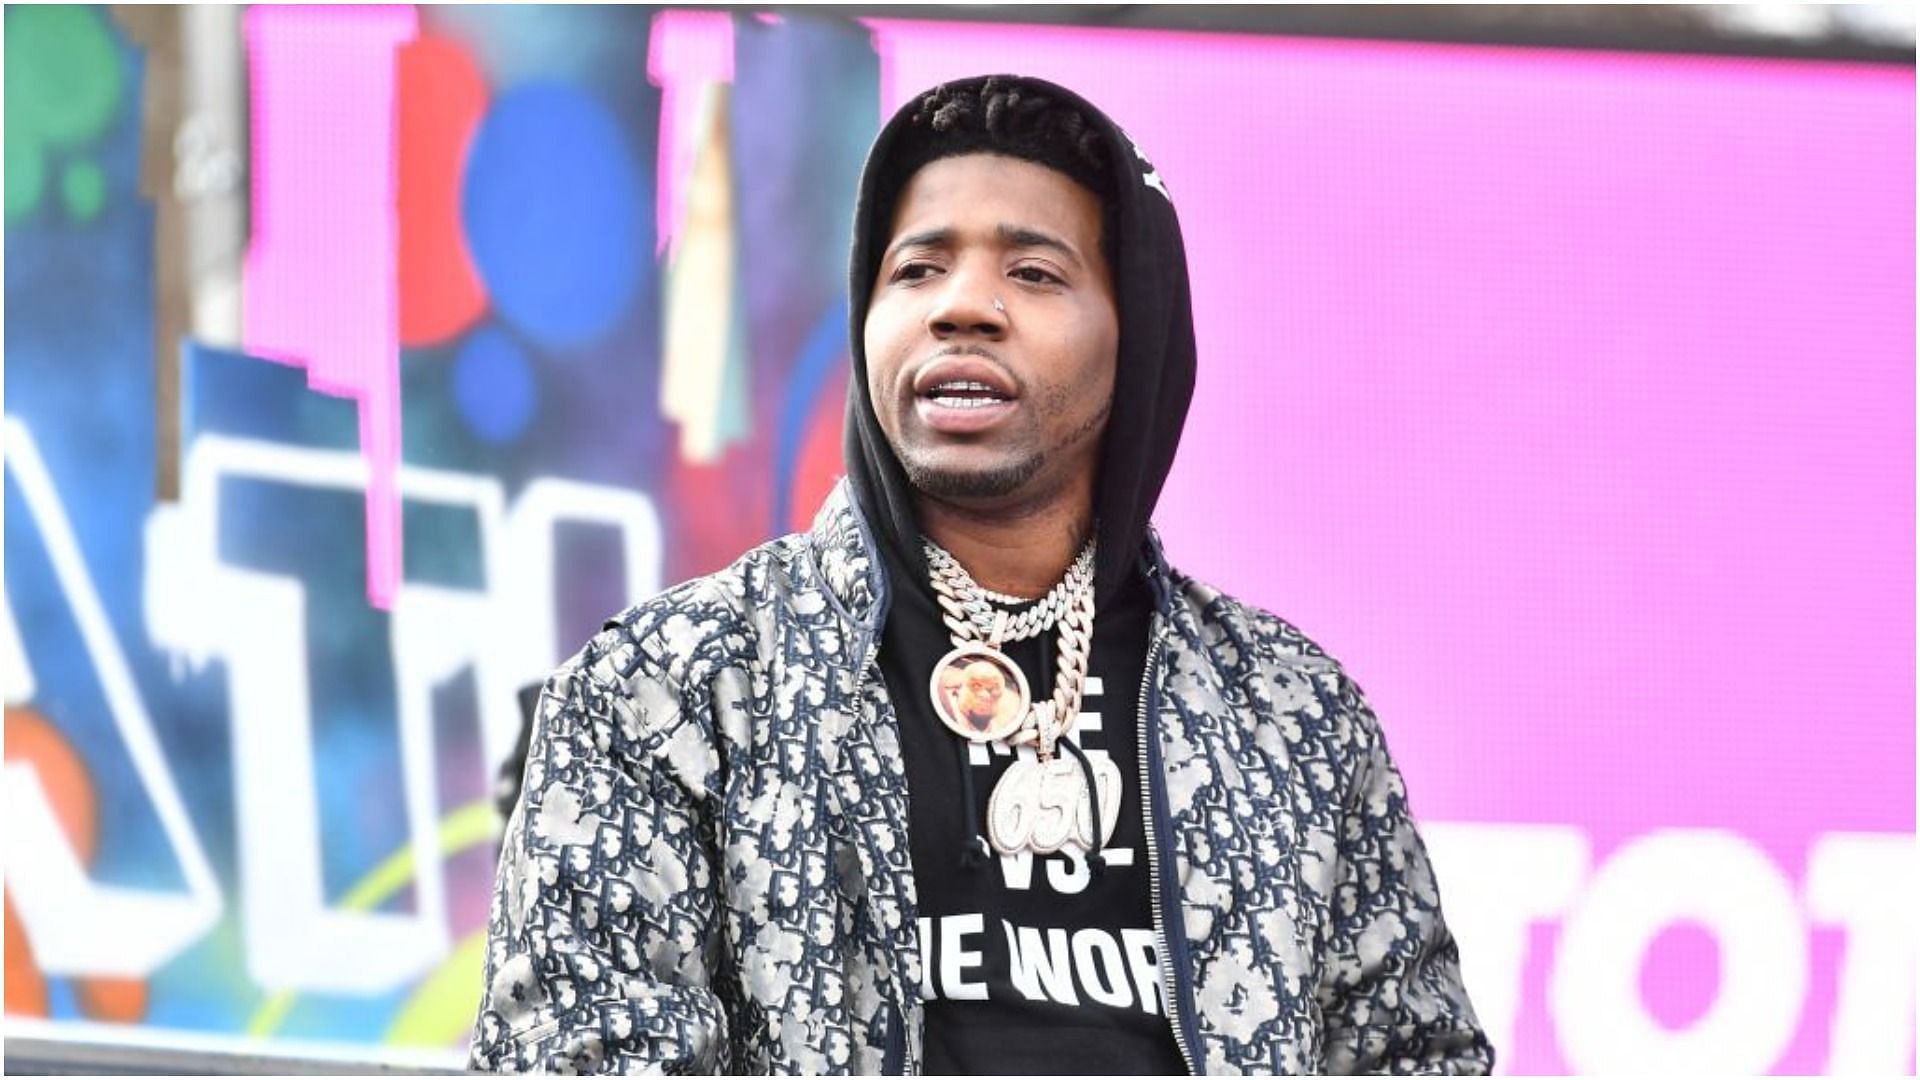 YFN Lucci was arrested in January 2021 (Image via Paras Griffin/Getty Images)